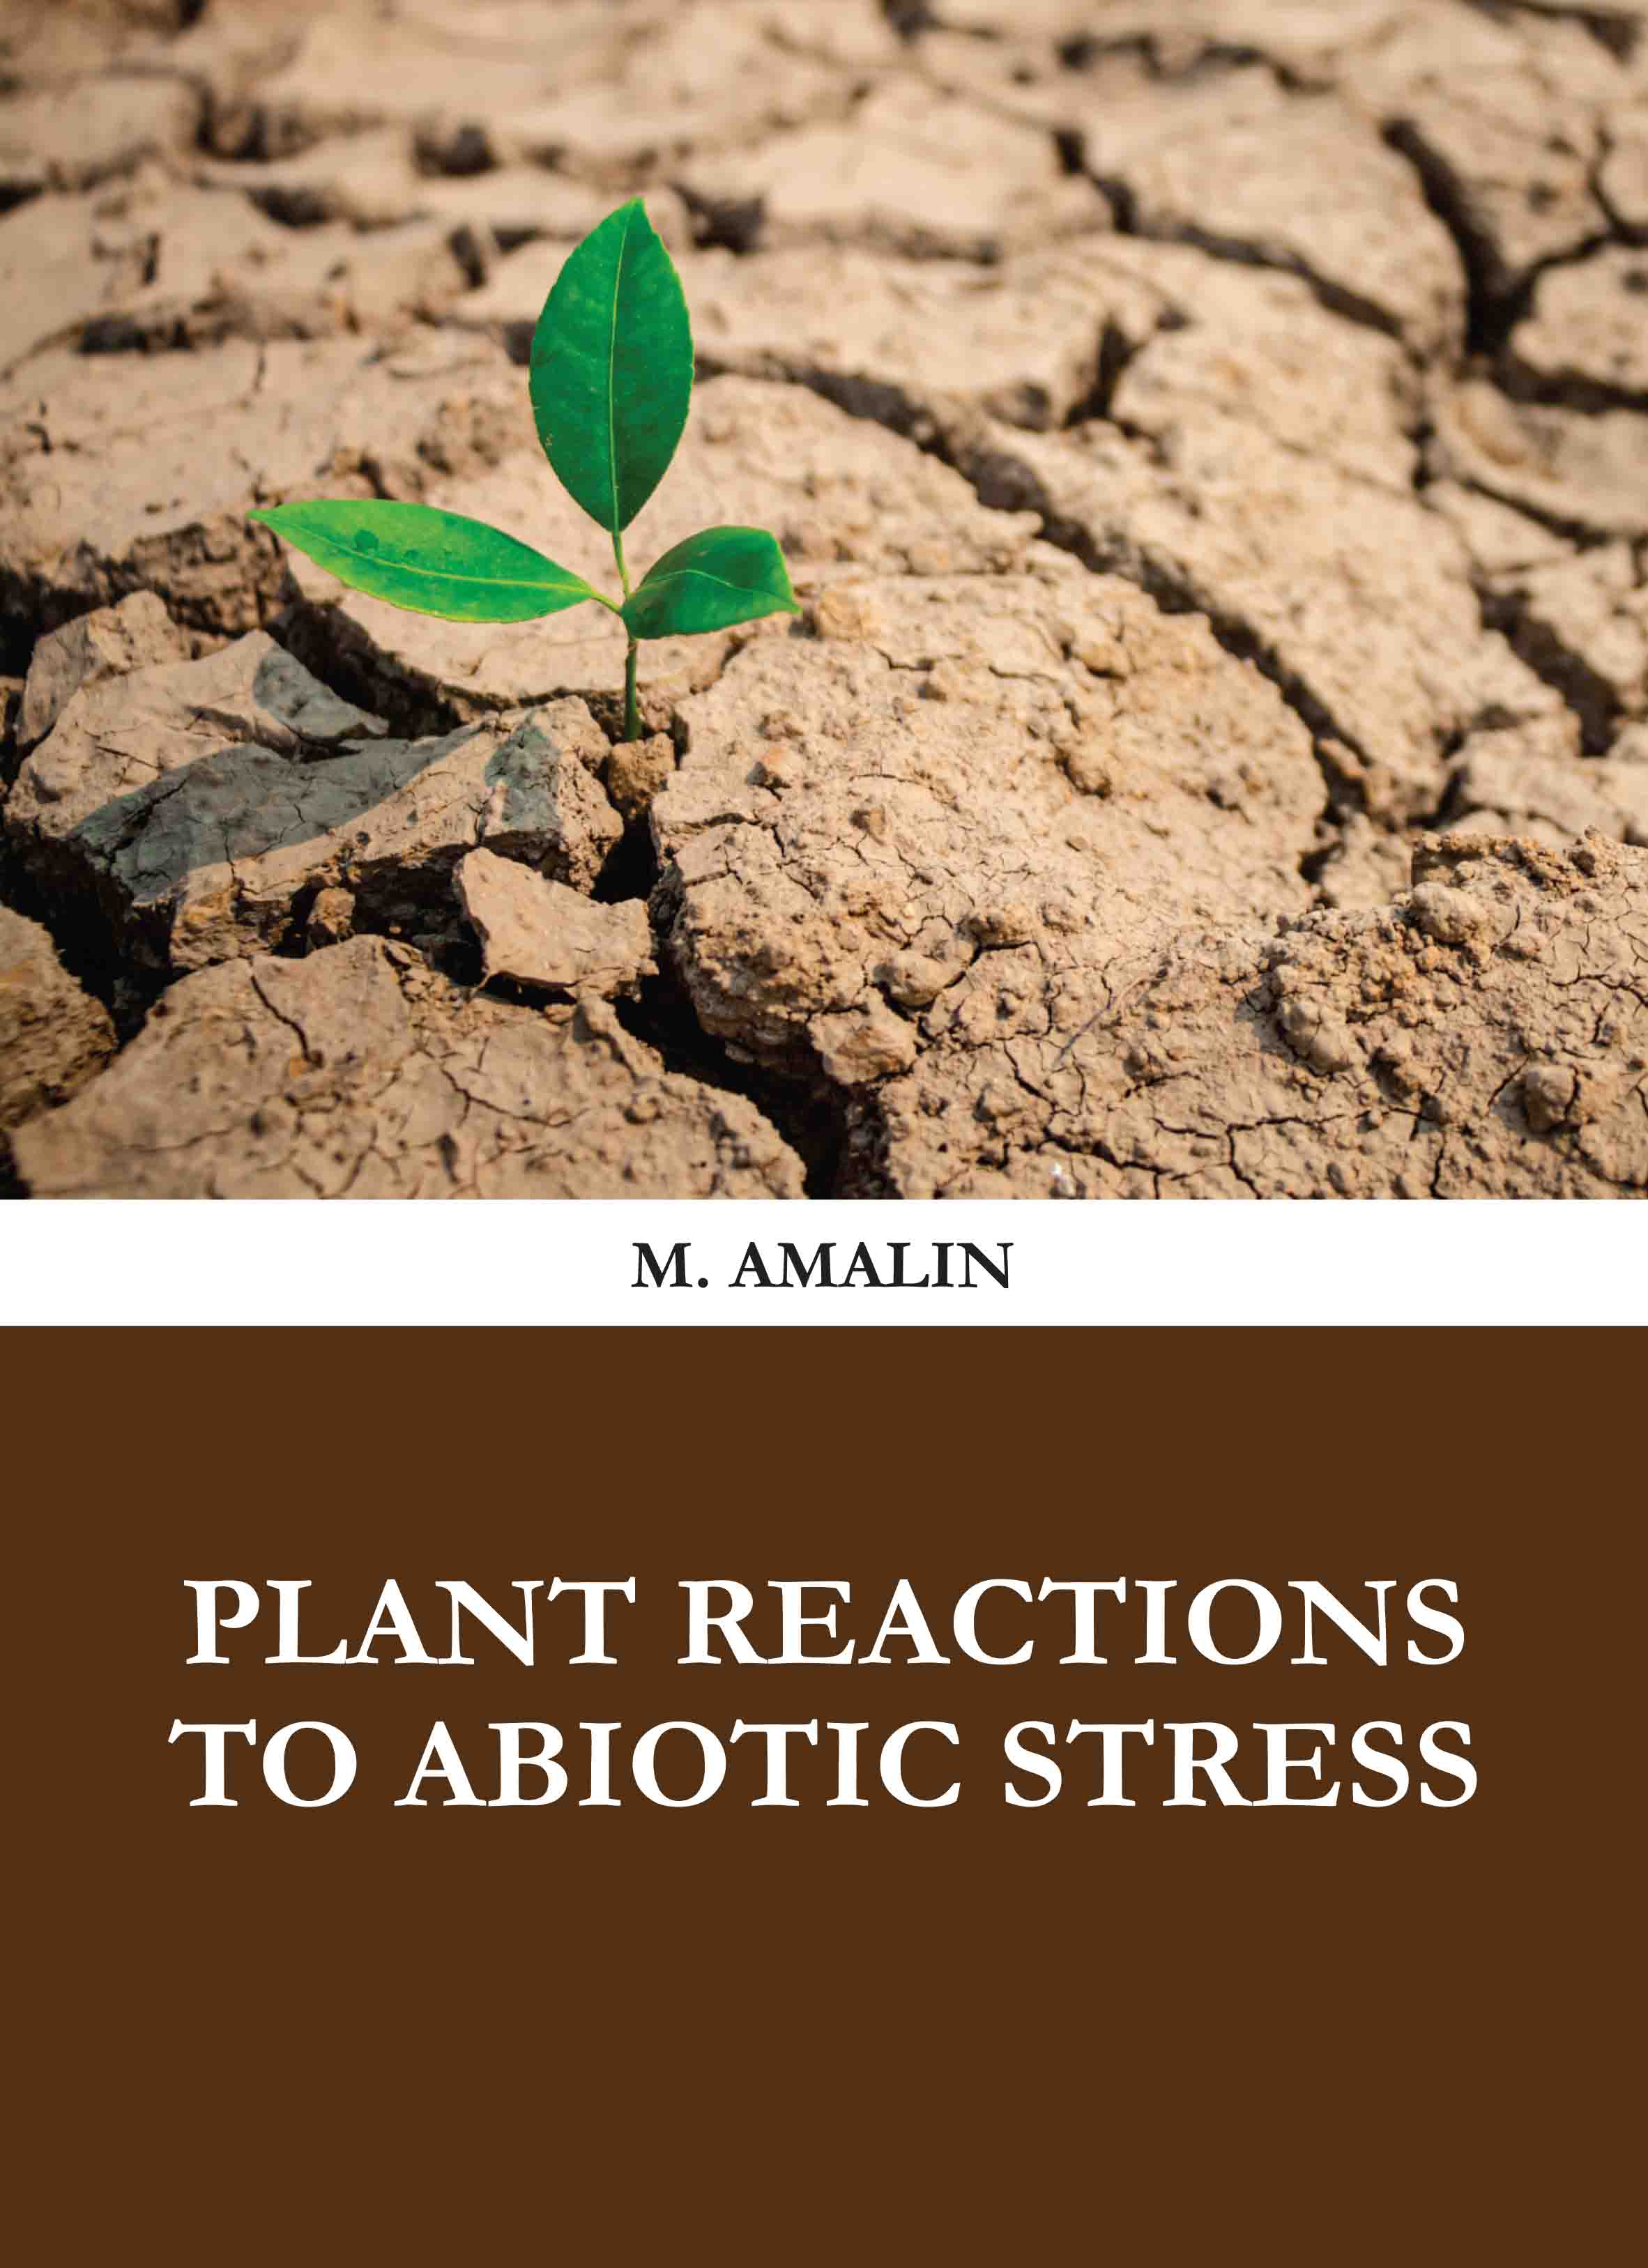 Plant Reactions to Abiotic Stress